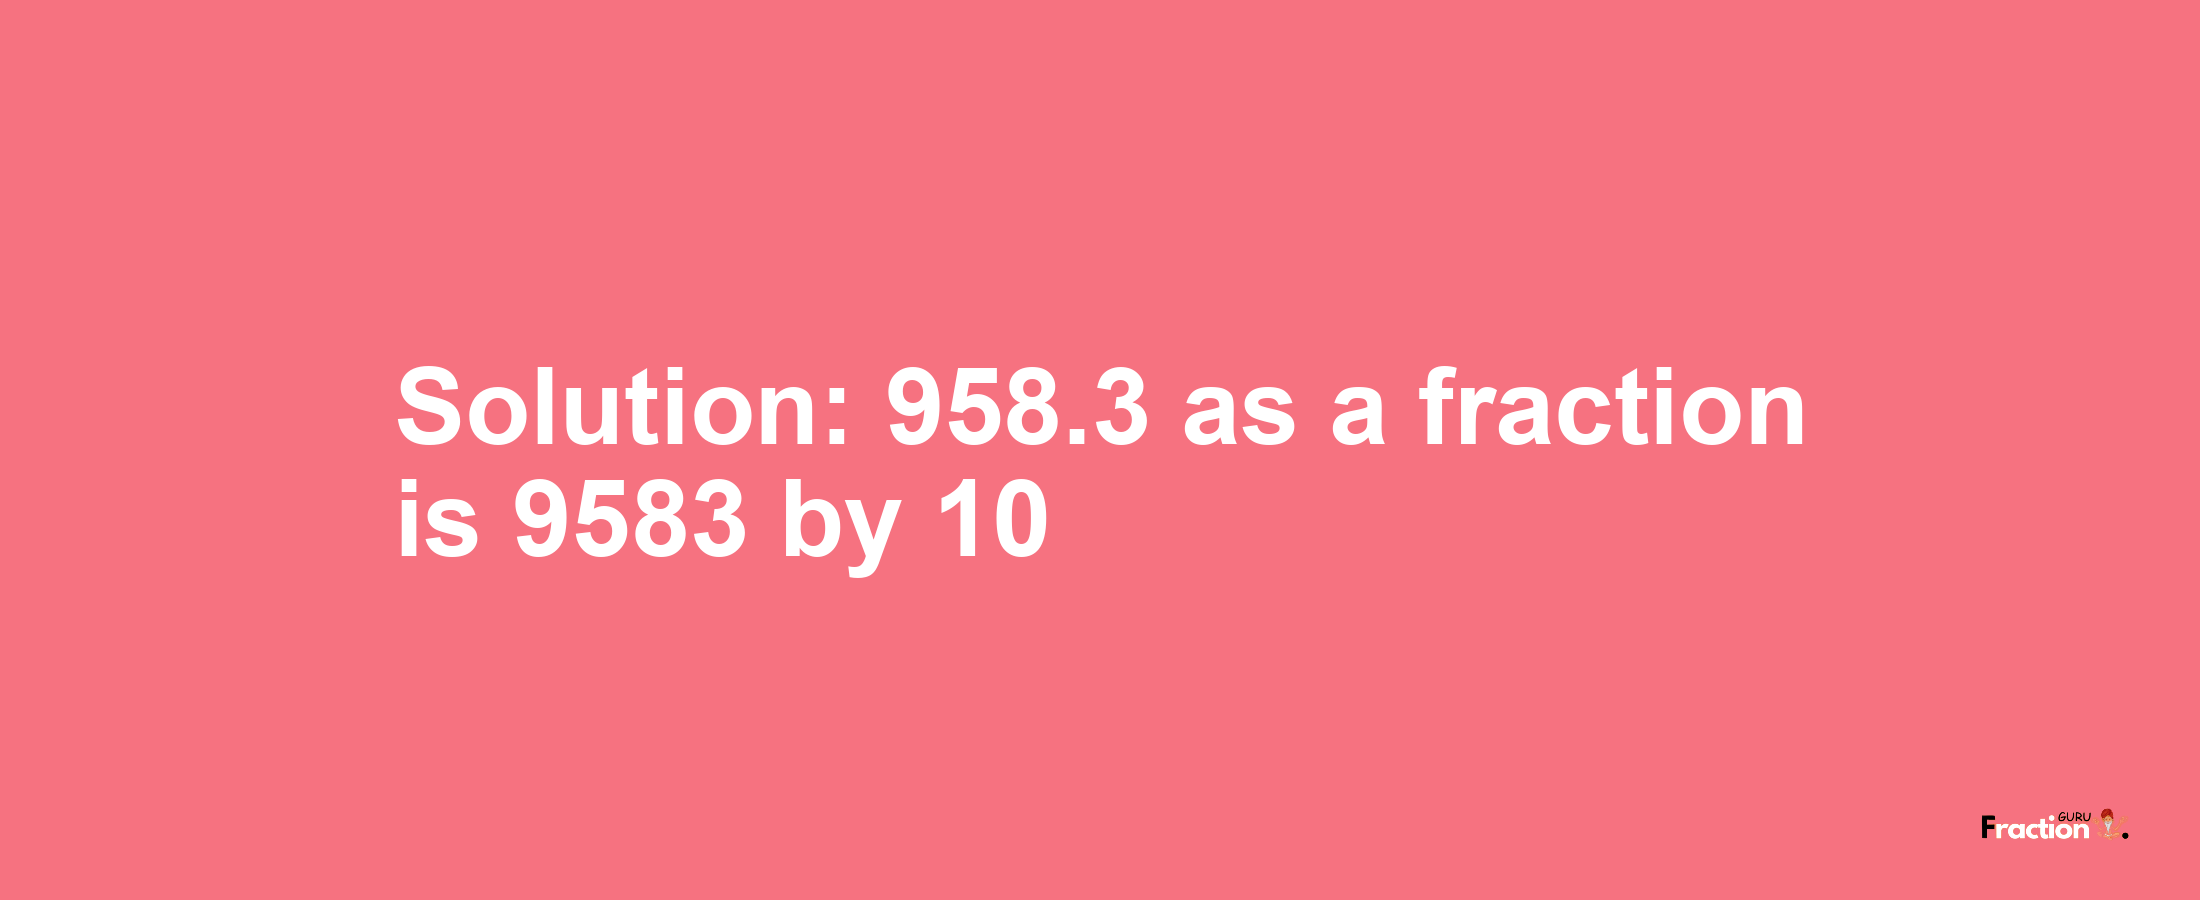 Solution:958.3 as a fraction is 9583/10